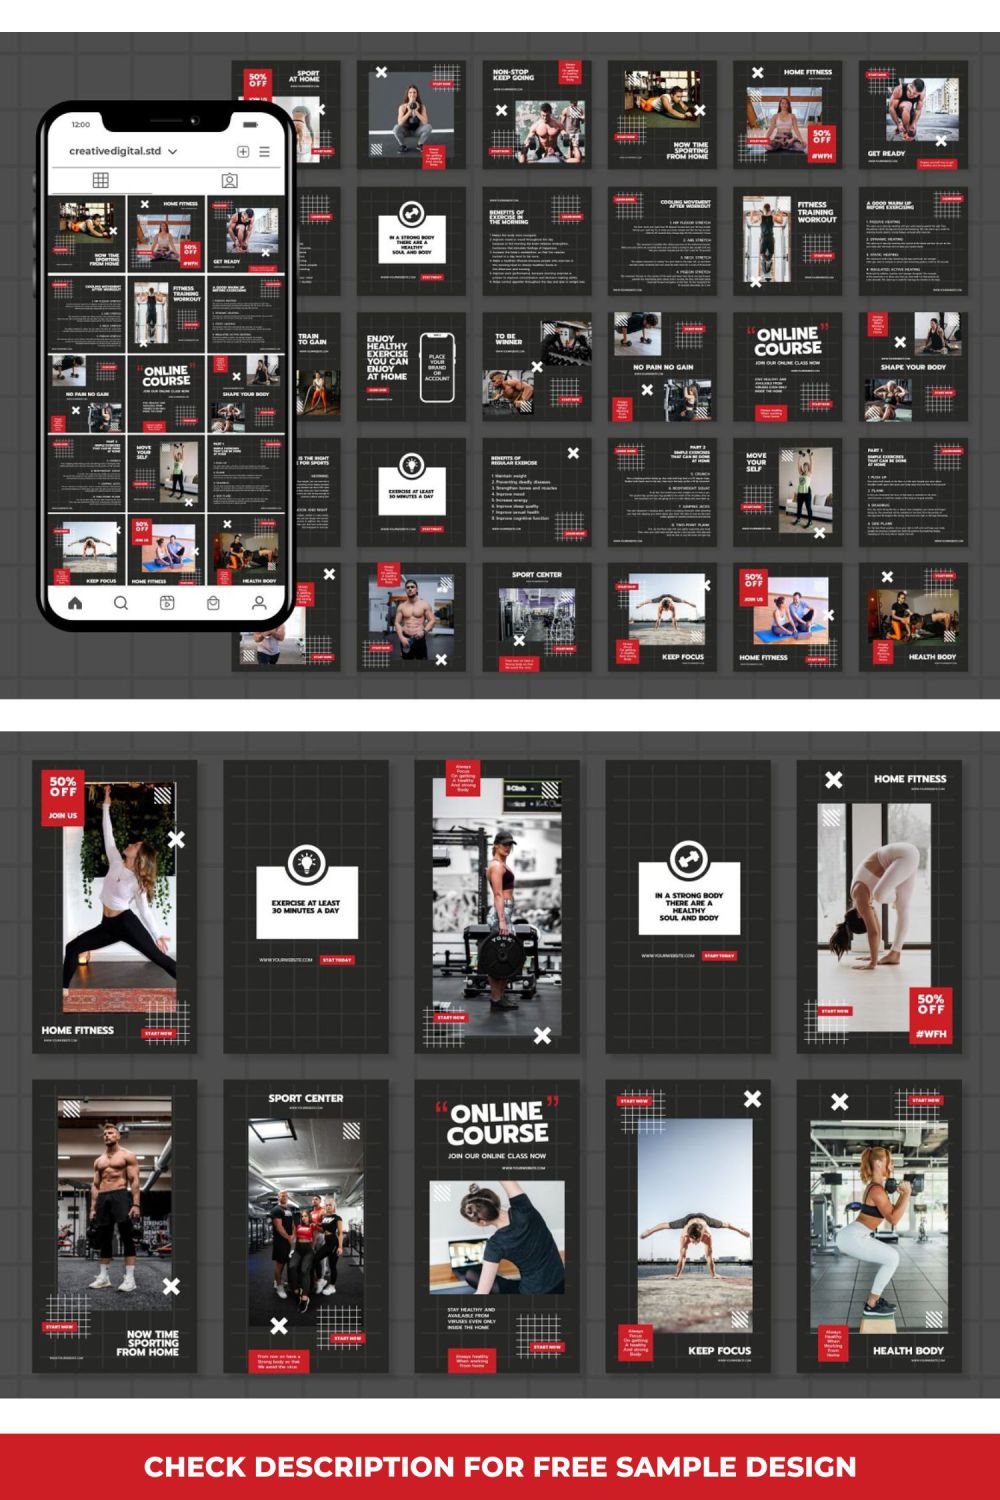 Home Fitness Story and Icon Social Media Template Pinterest Image.